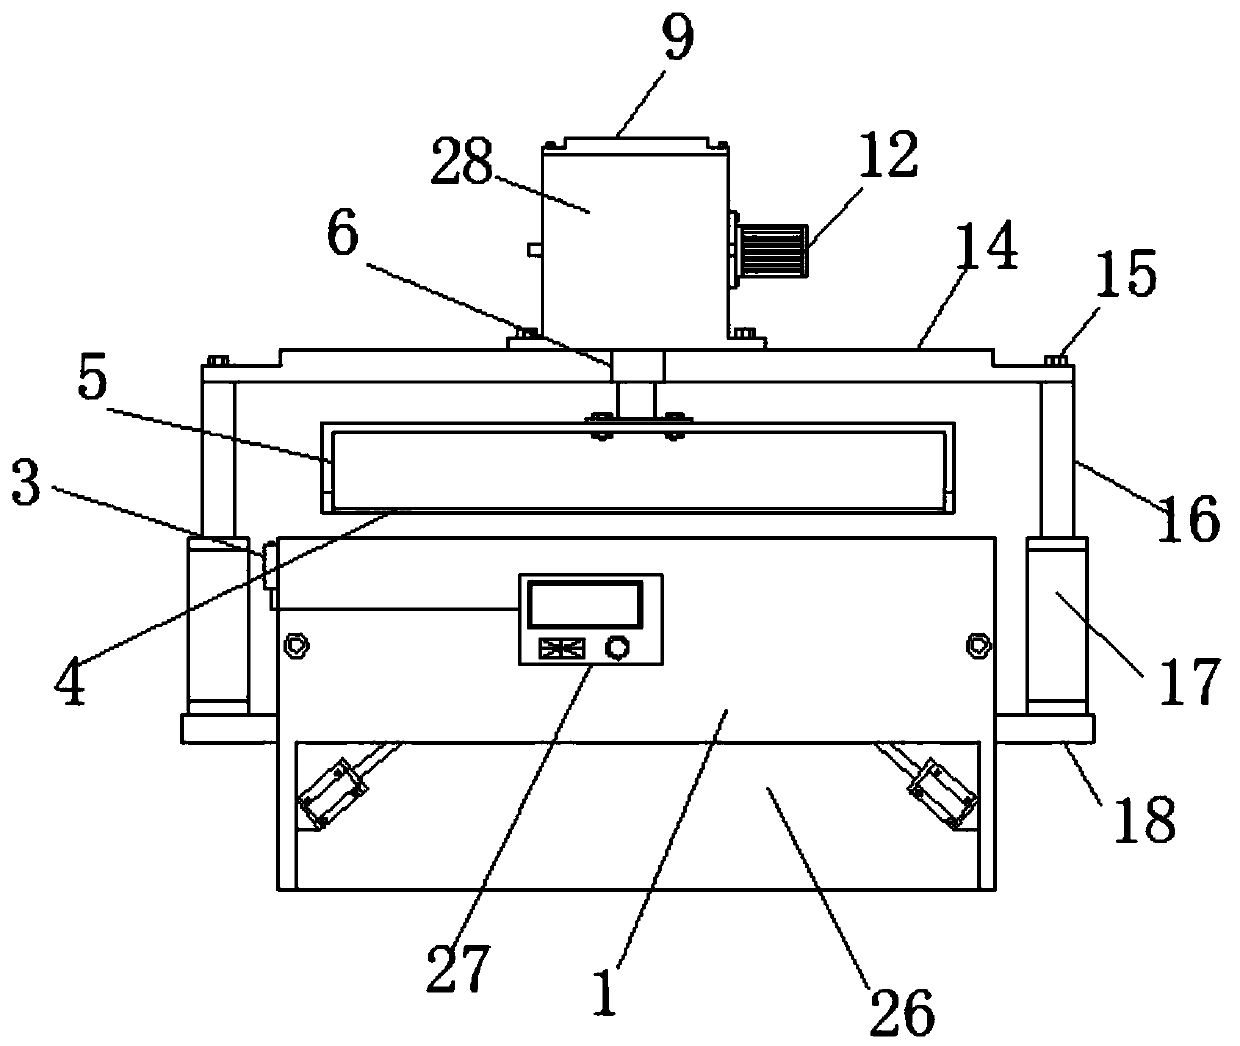 Cotton filling device capable of fluffing cotton fibers for spinning purpose